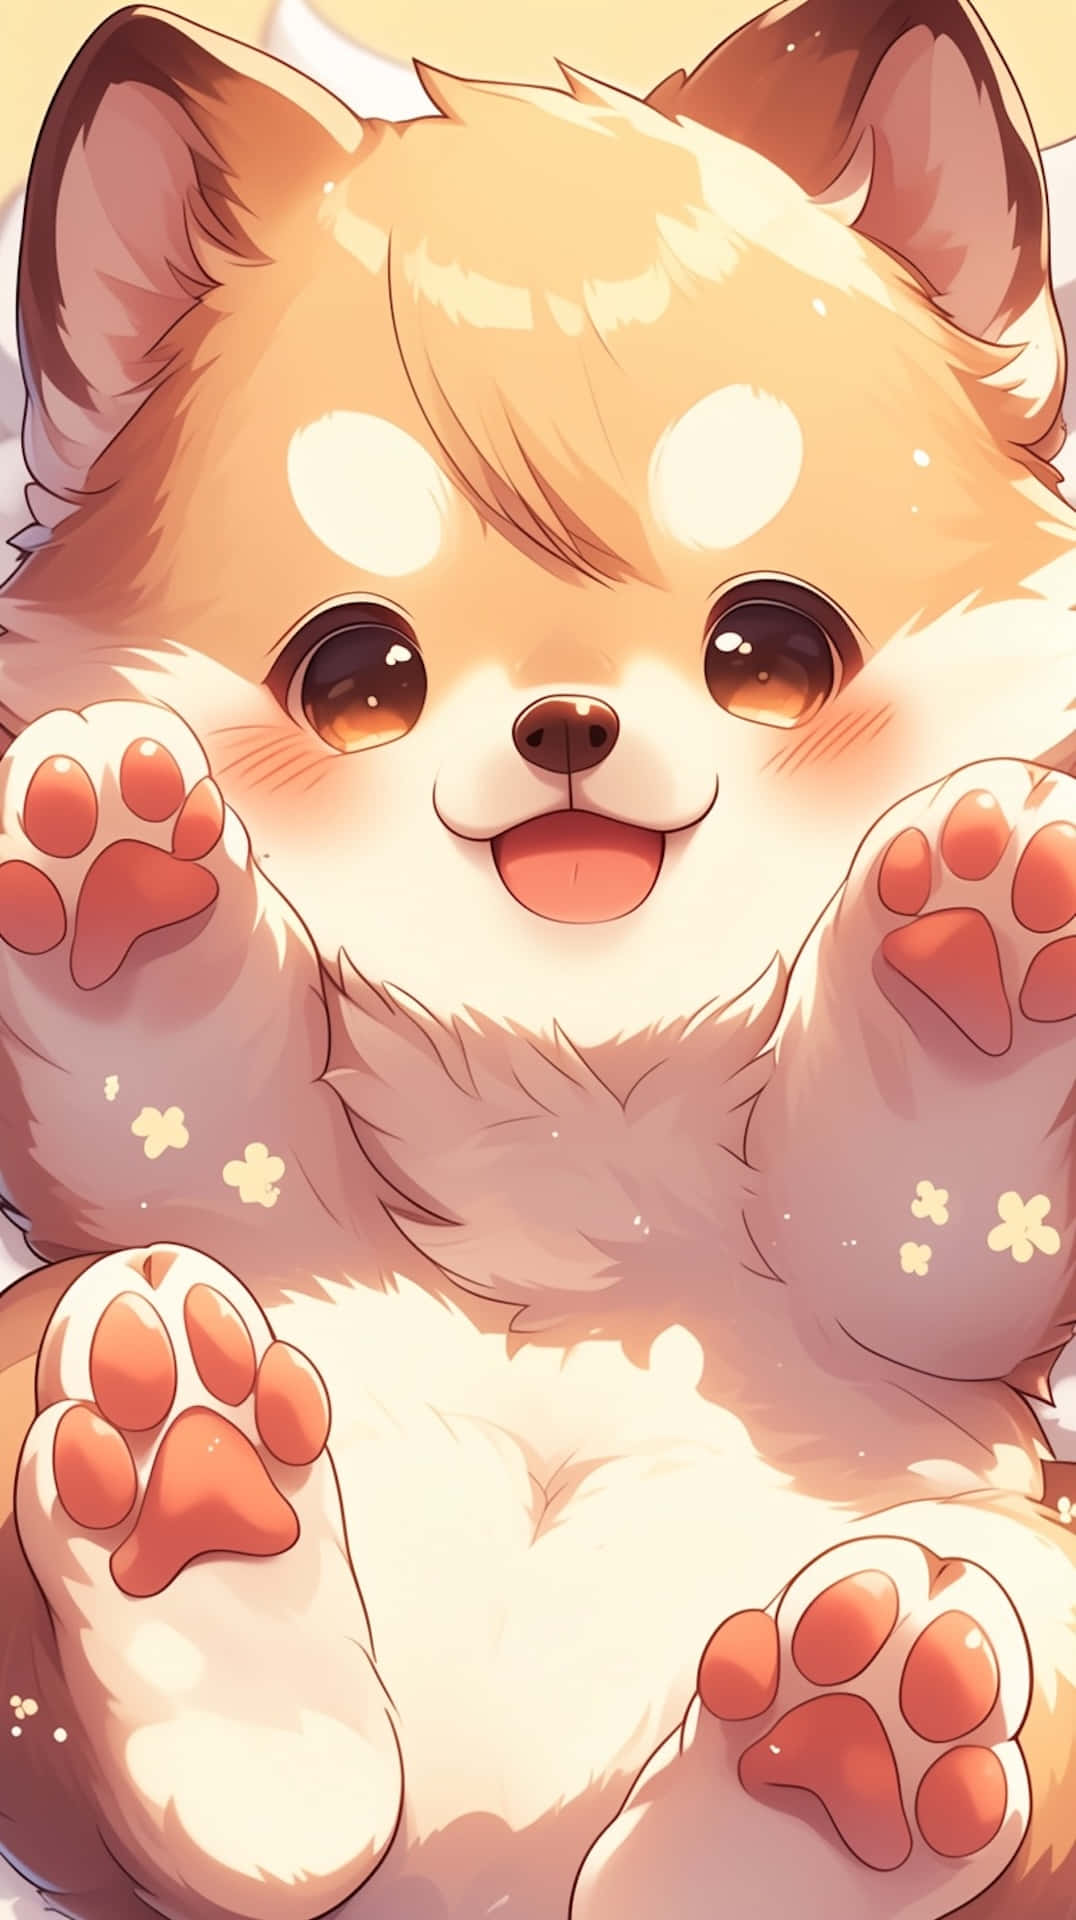 Adorable Anime Puppy Smiling Wallpaper